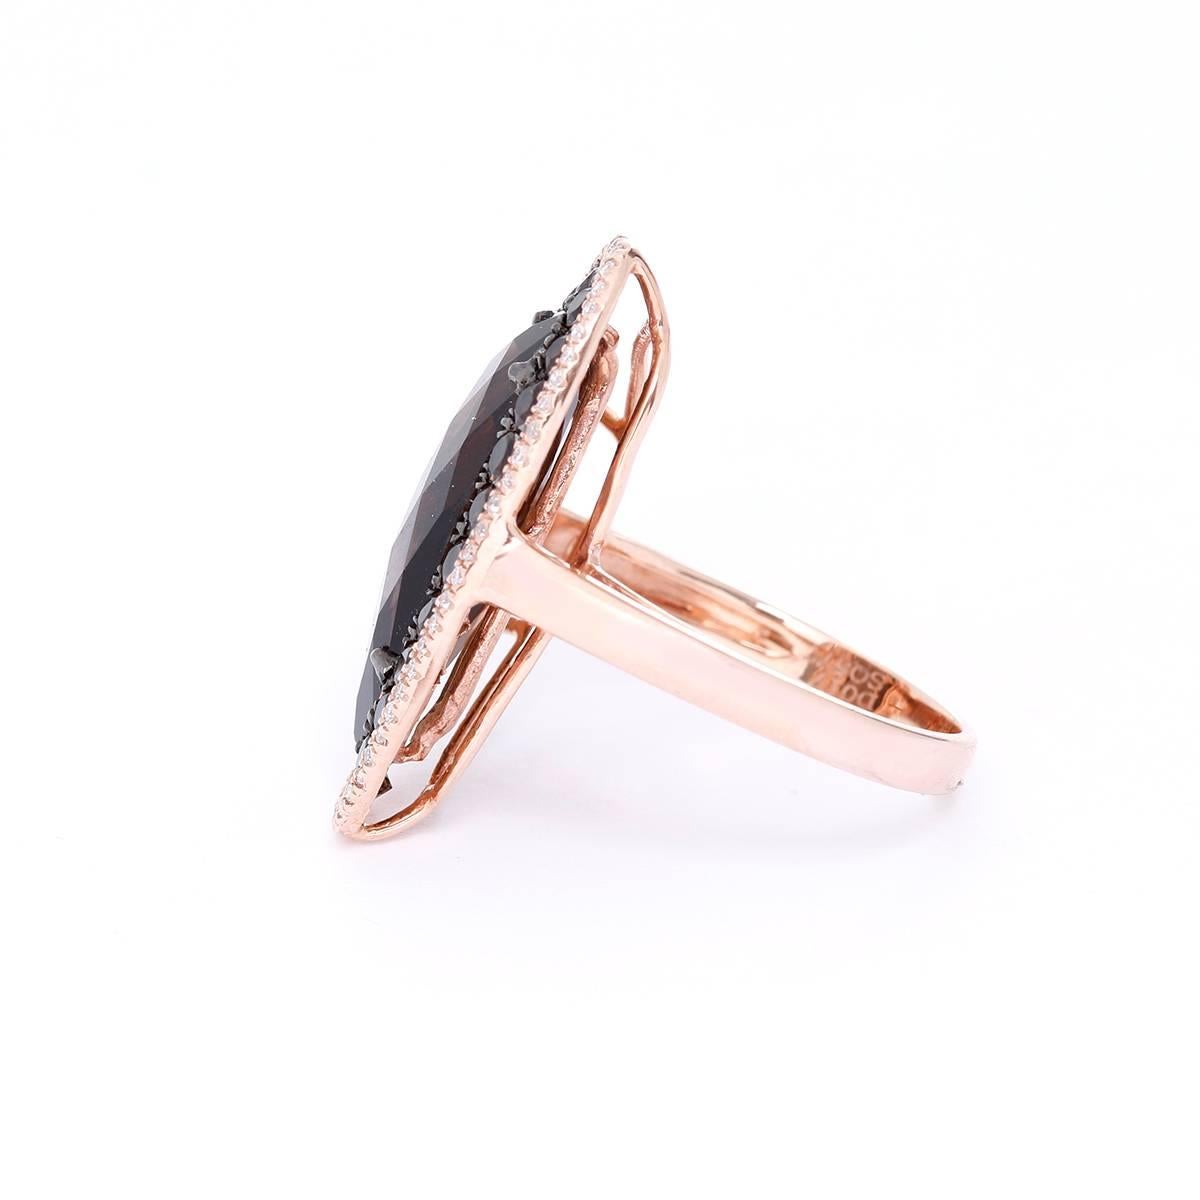 Amazing Smoky Quartz and Diamond Ring 7-1/2 - This amazing ring has 0.17 carats of  diamonds, 0.75 carats of smoky quartz ,and 1 piece fancy smoky quartz set in 14k rose gold. Ring measures apx. 5/8-inch in width at the widest and apx. 1-inch in